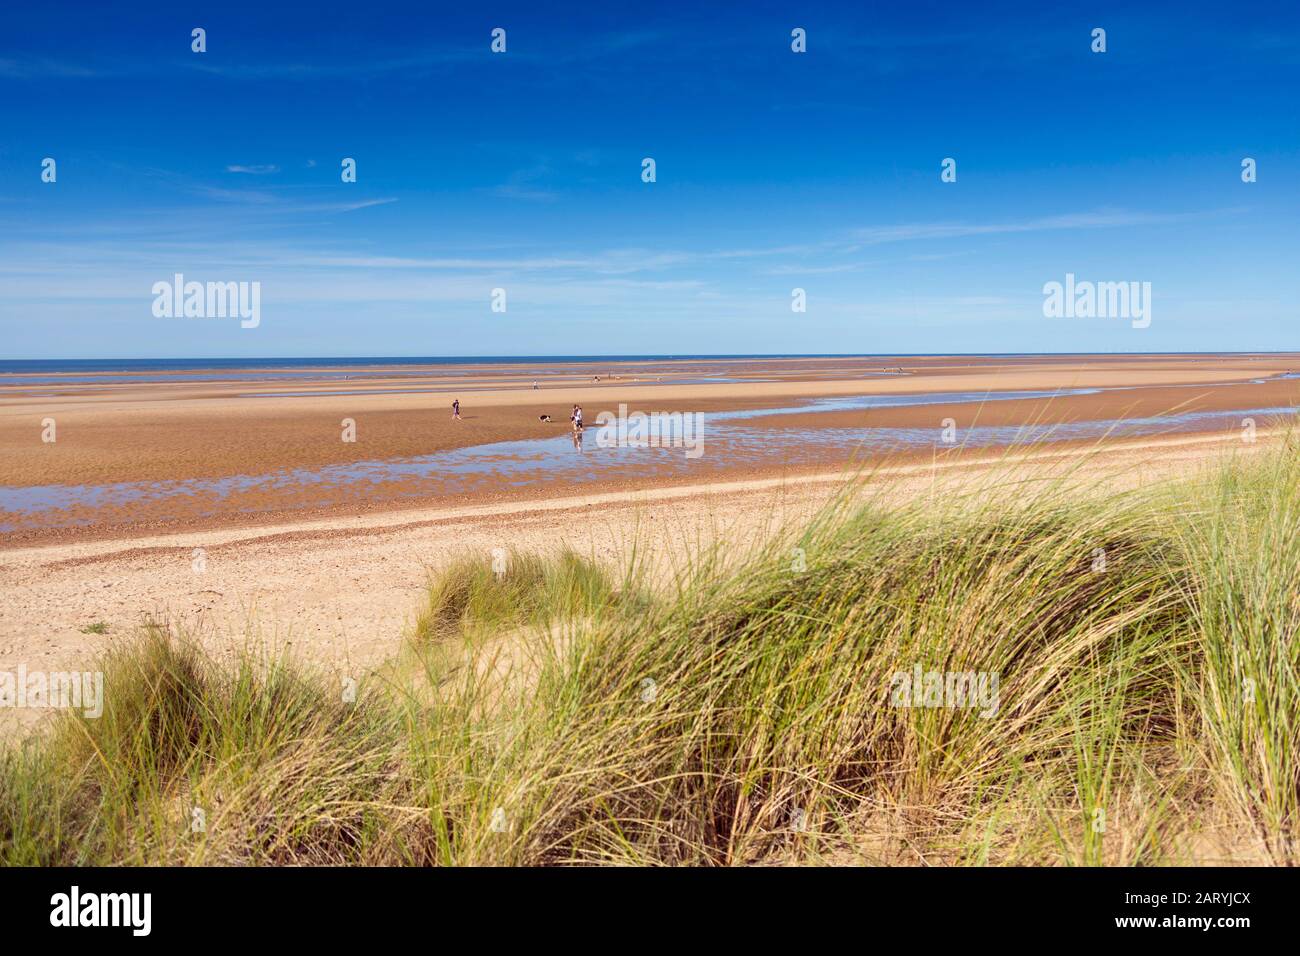 The beach and marram grass on dunes at Holkham, Norfolk, UK Stock Photo